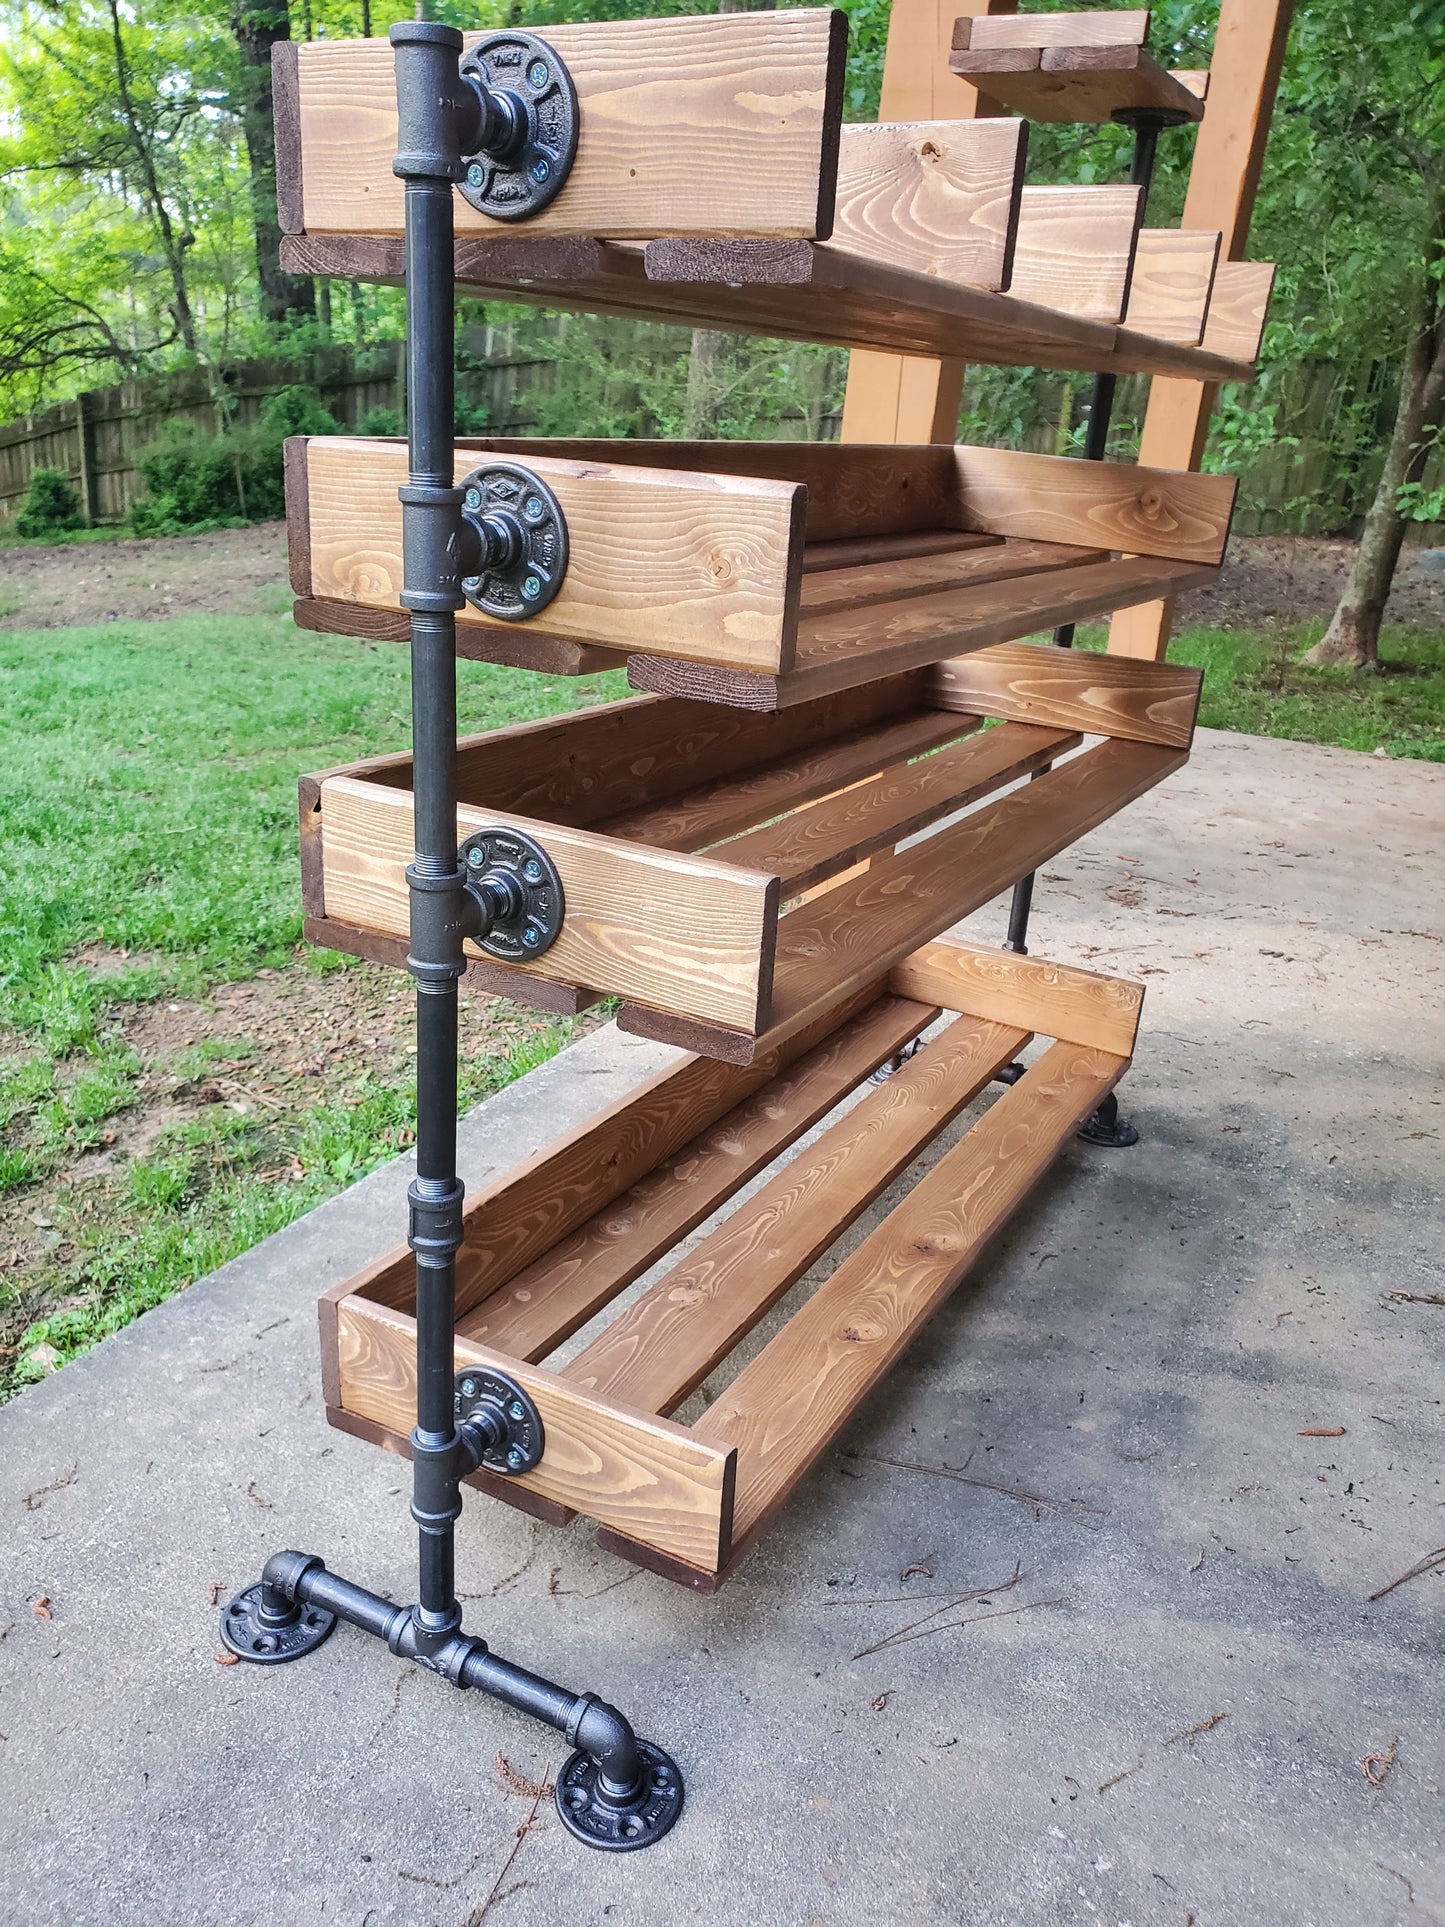 Standard Handmade Reclaimed Cubbies Wood Shoe Stand with Boot Level / Rack / Organizer with Pipe Stand Legs